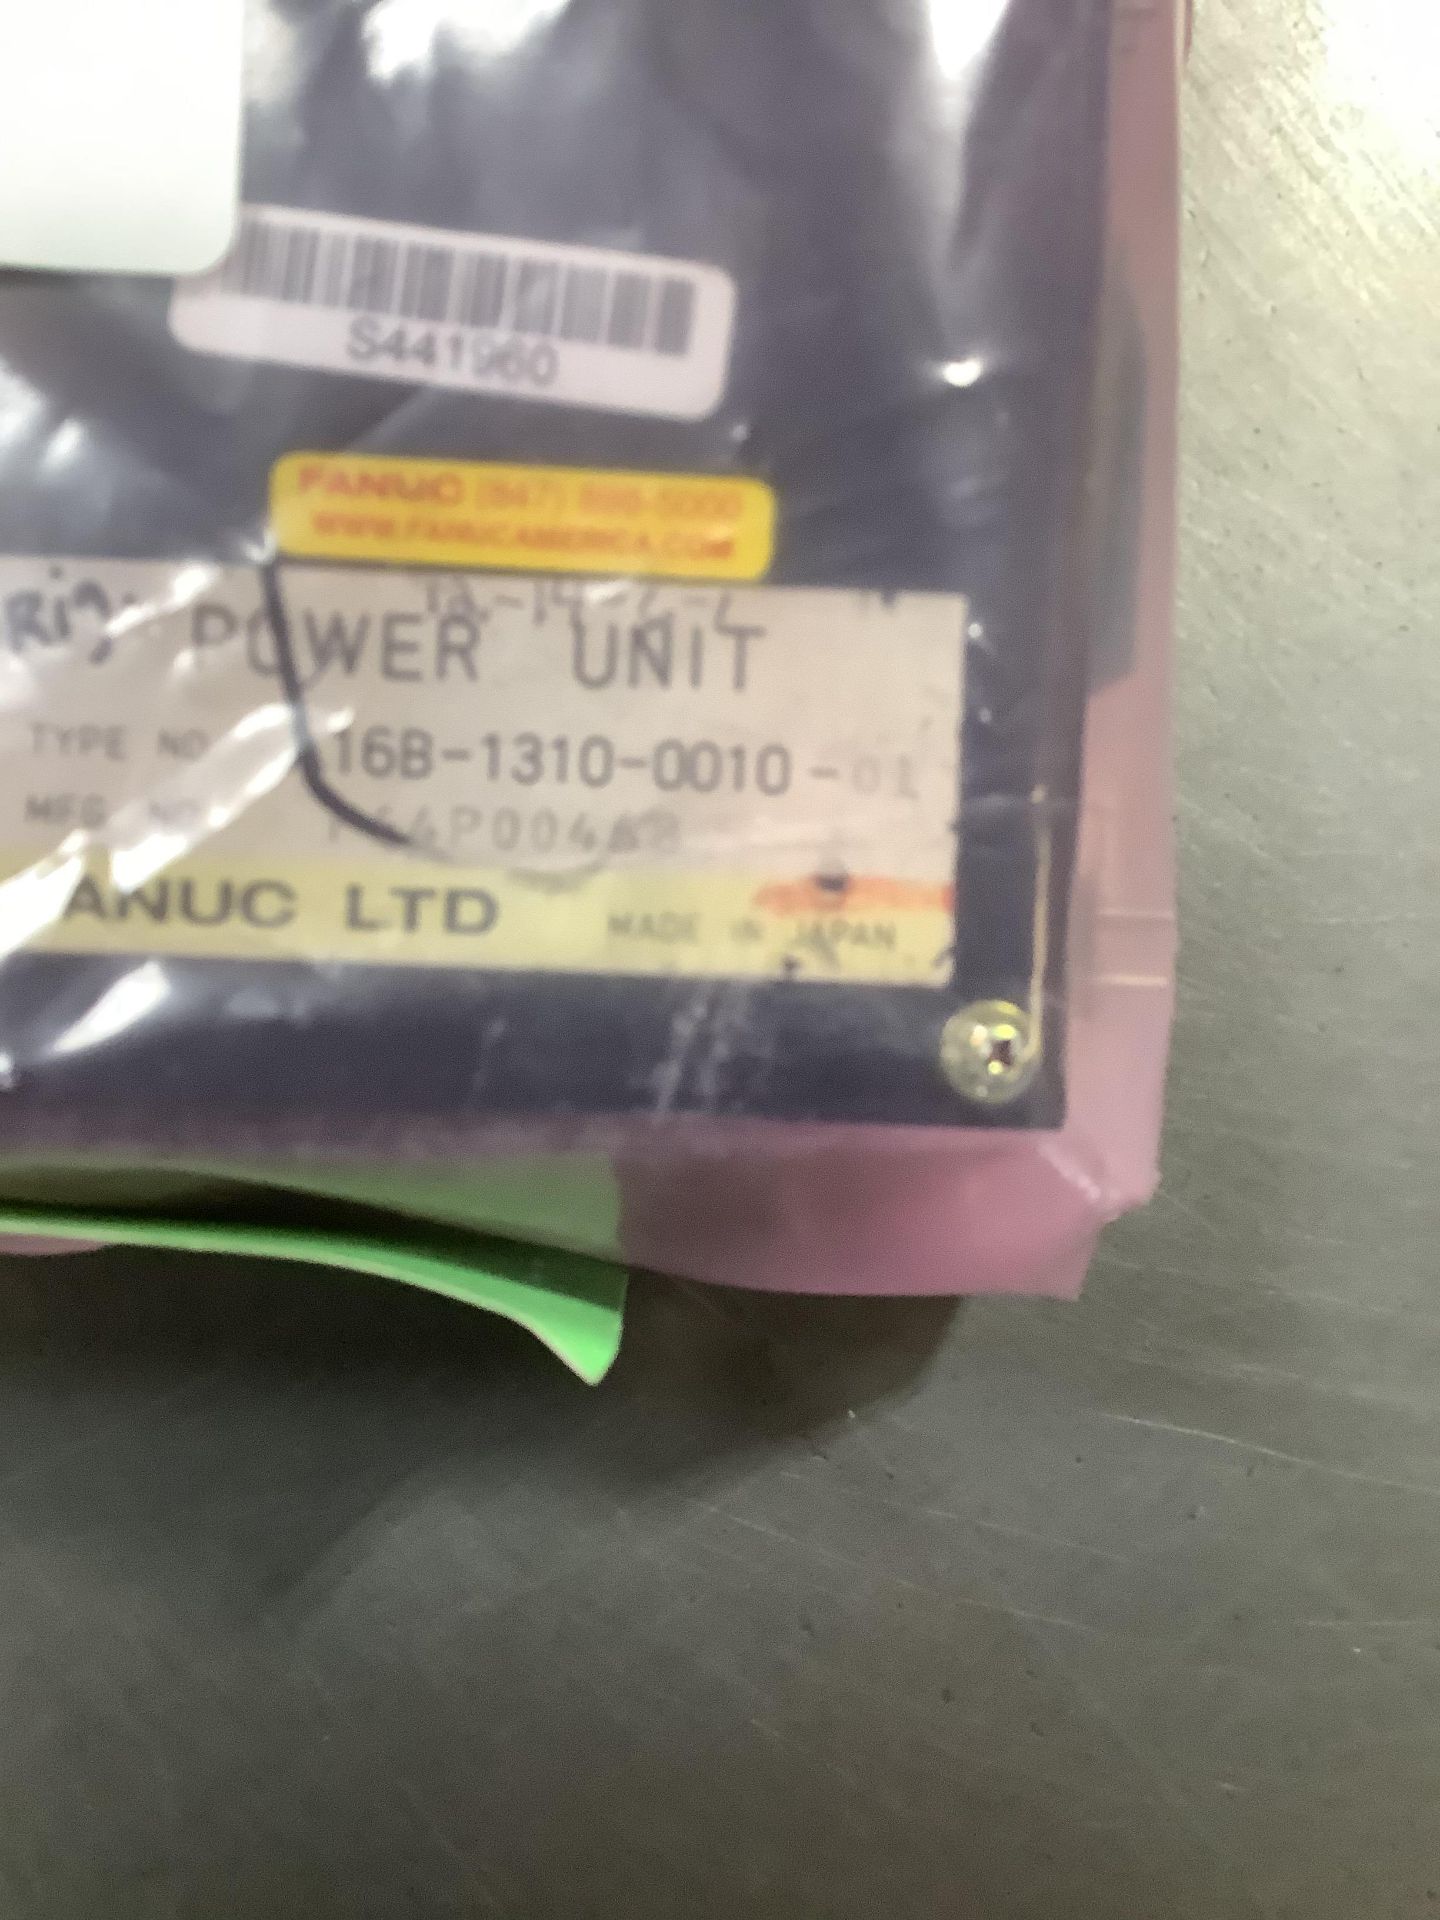 NEW or REFURB Fanuc A16B-1310-0010 Power Supply - Image 2 of 3